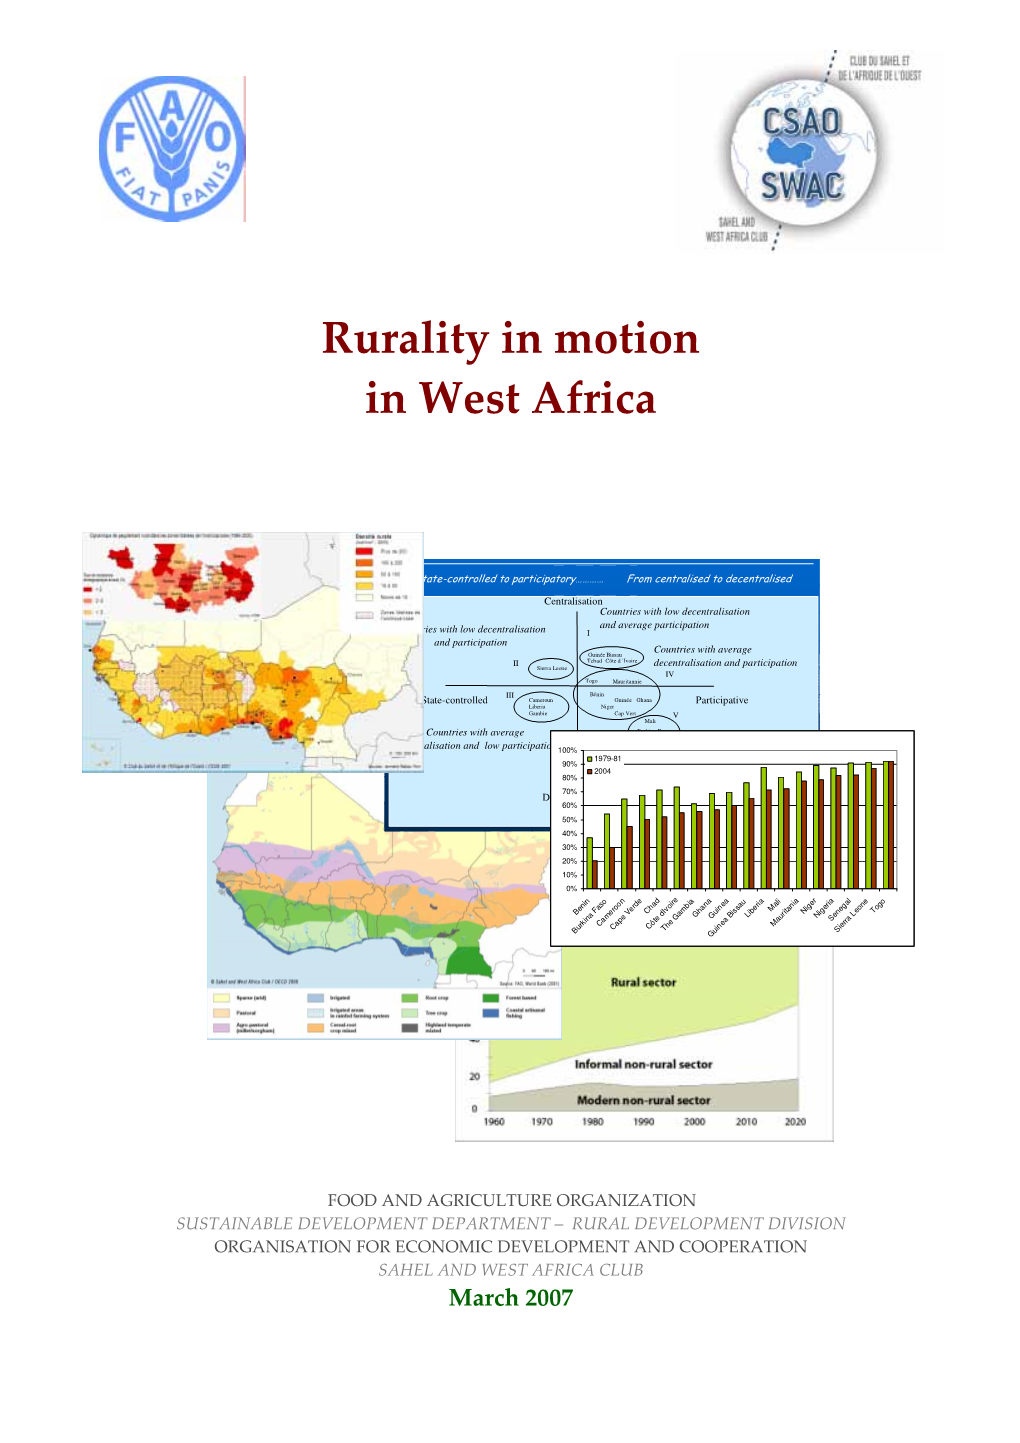 Rurality in Motion in West Africa